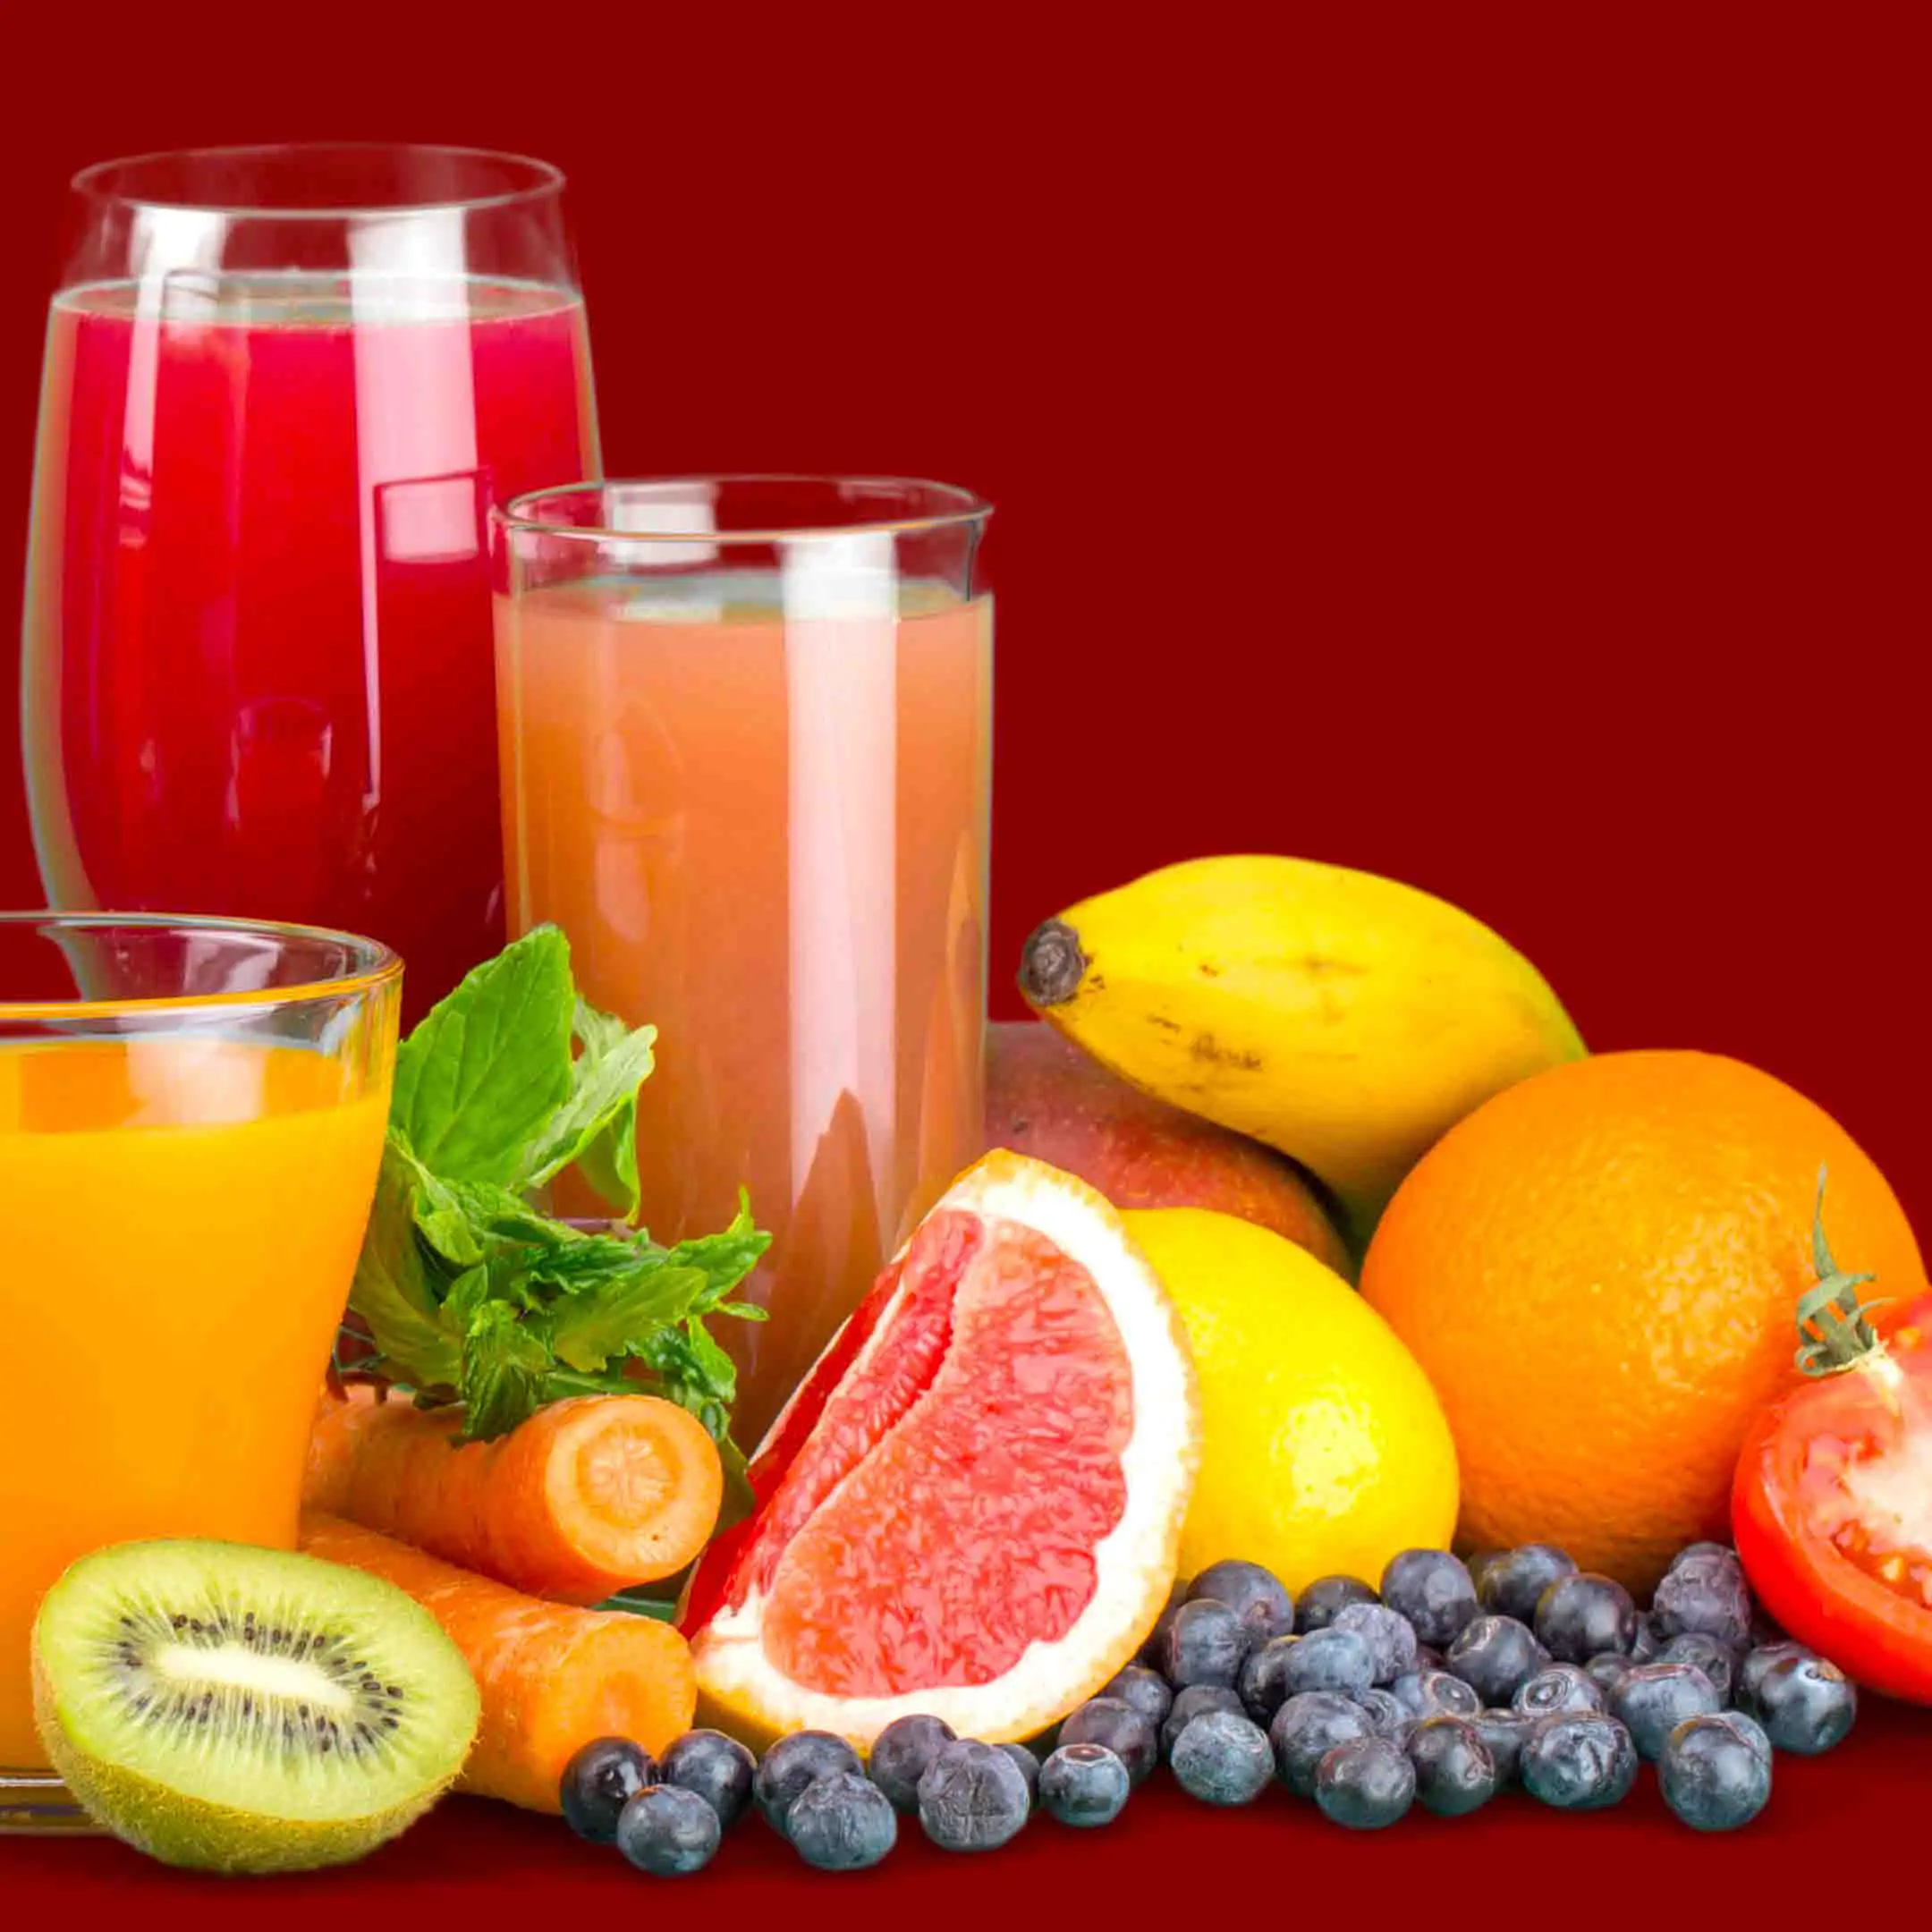 Fruits and juice glases